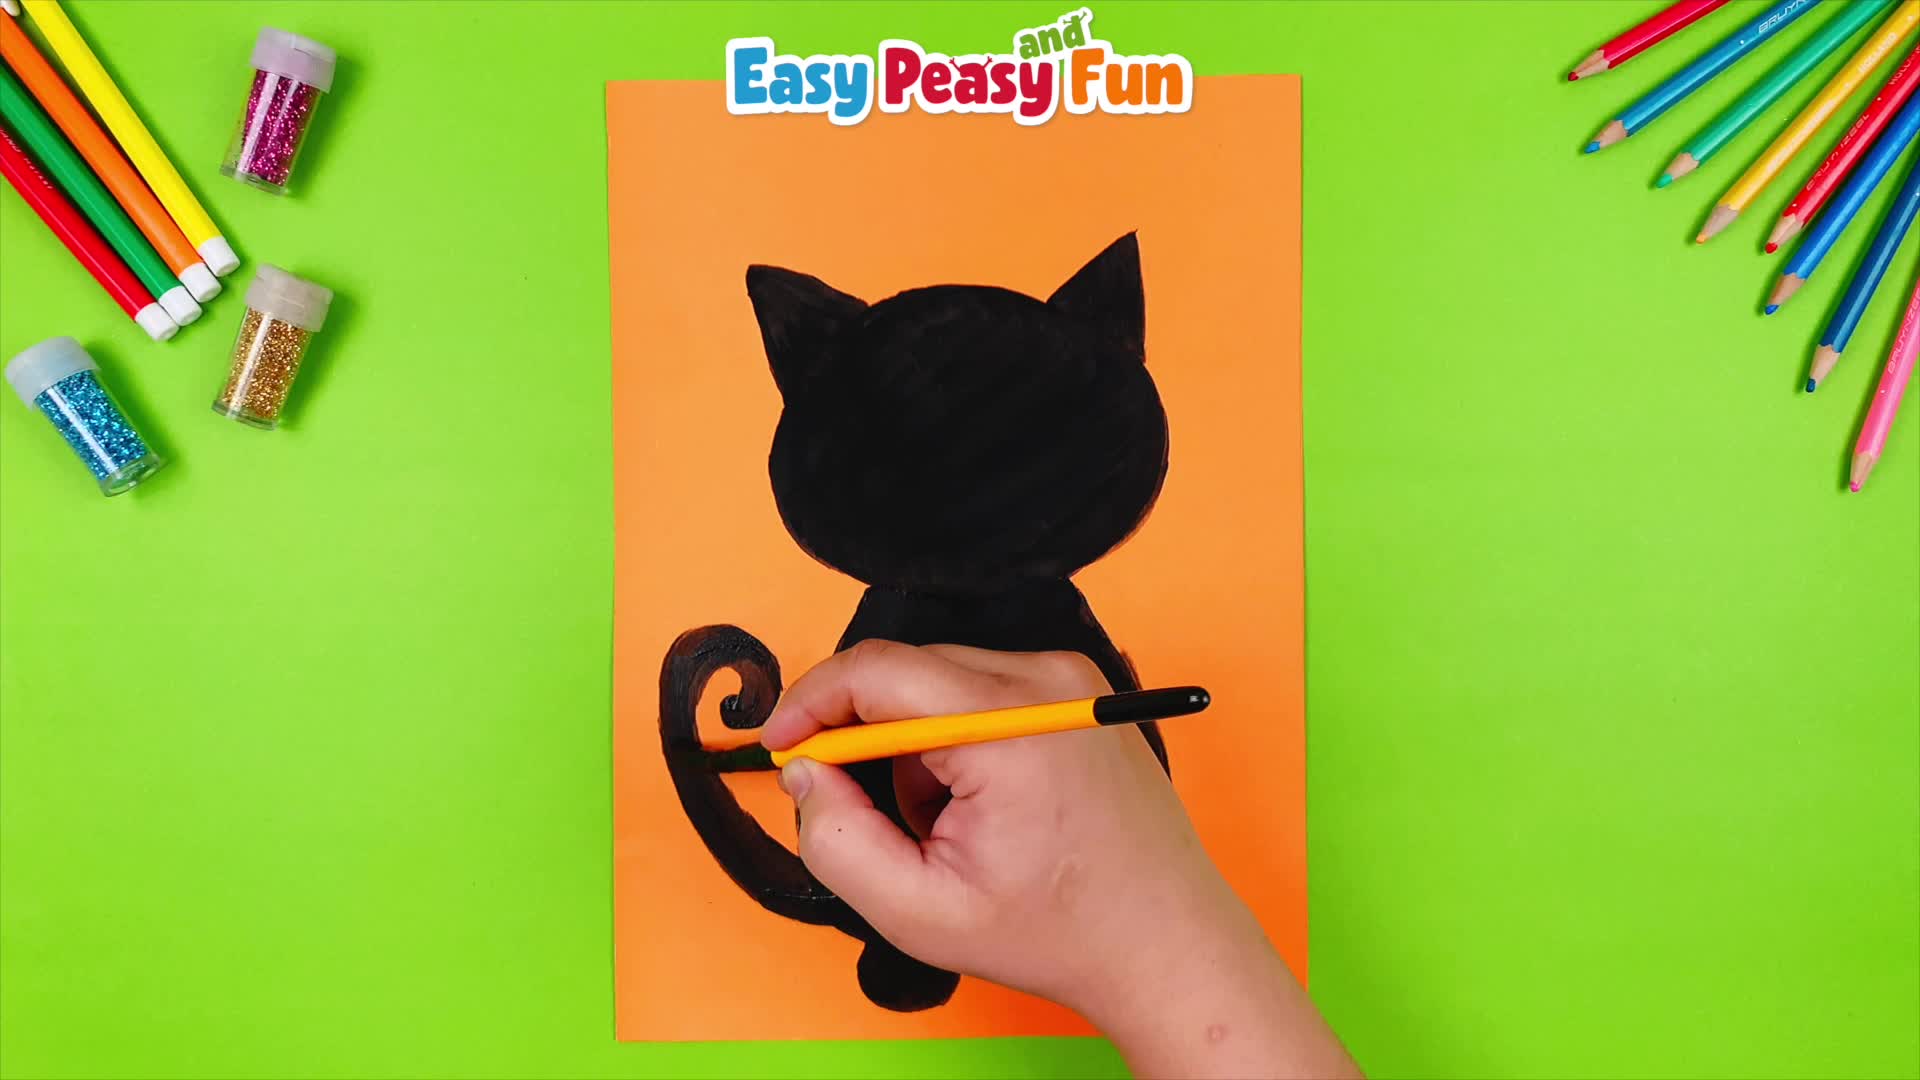 How to Draw a Black Cat for Halloween